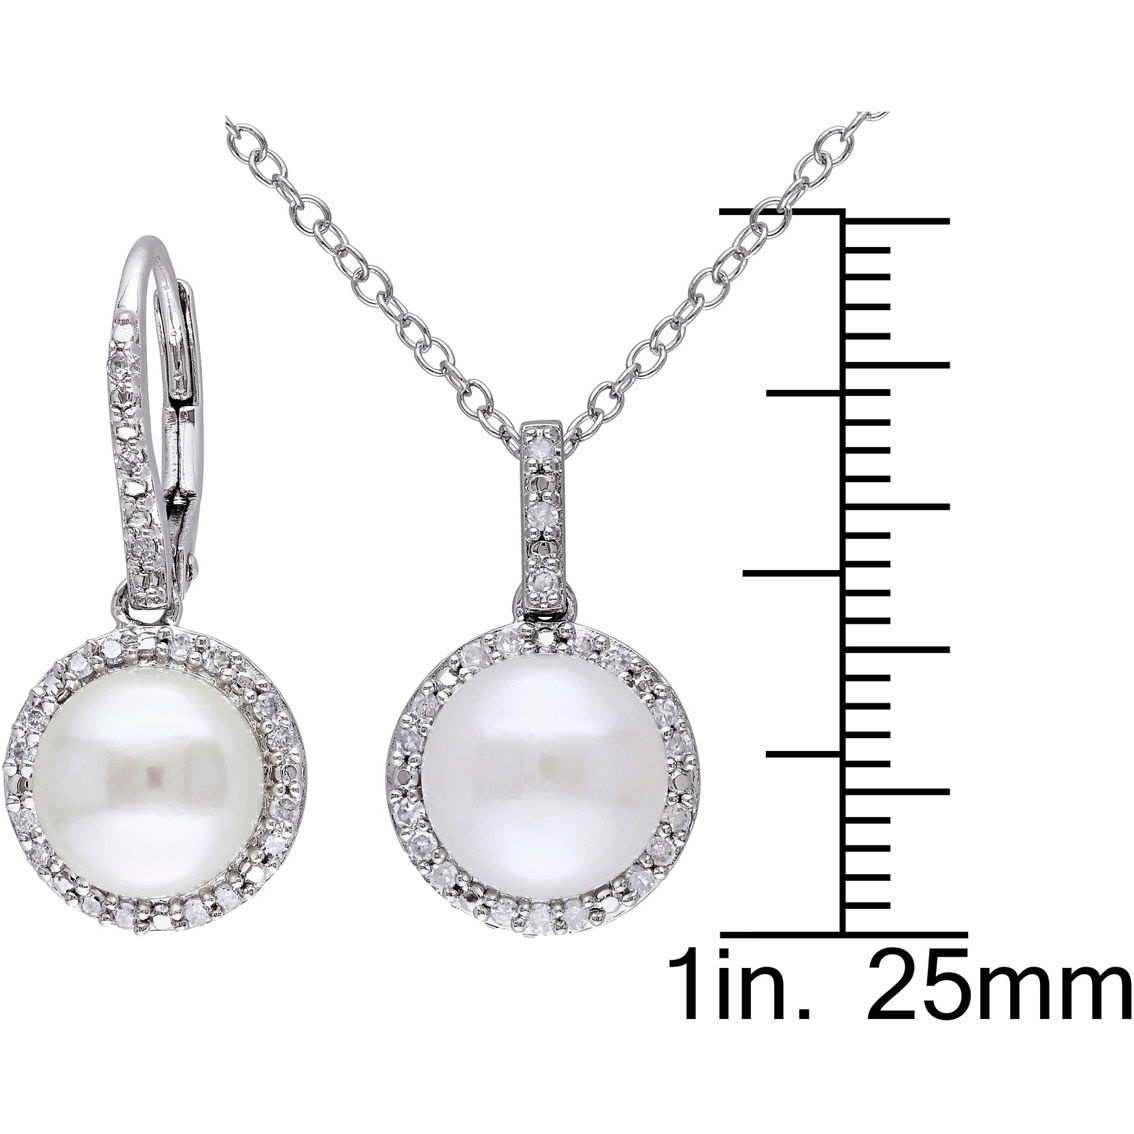 Sofia B. Sterling Silver 1/3 CTW Diamond Freshwater Pearl 2 pc. Jewelry Set - Image 2 of 2